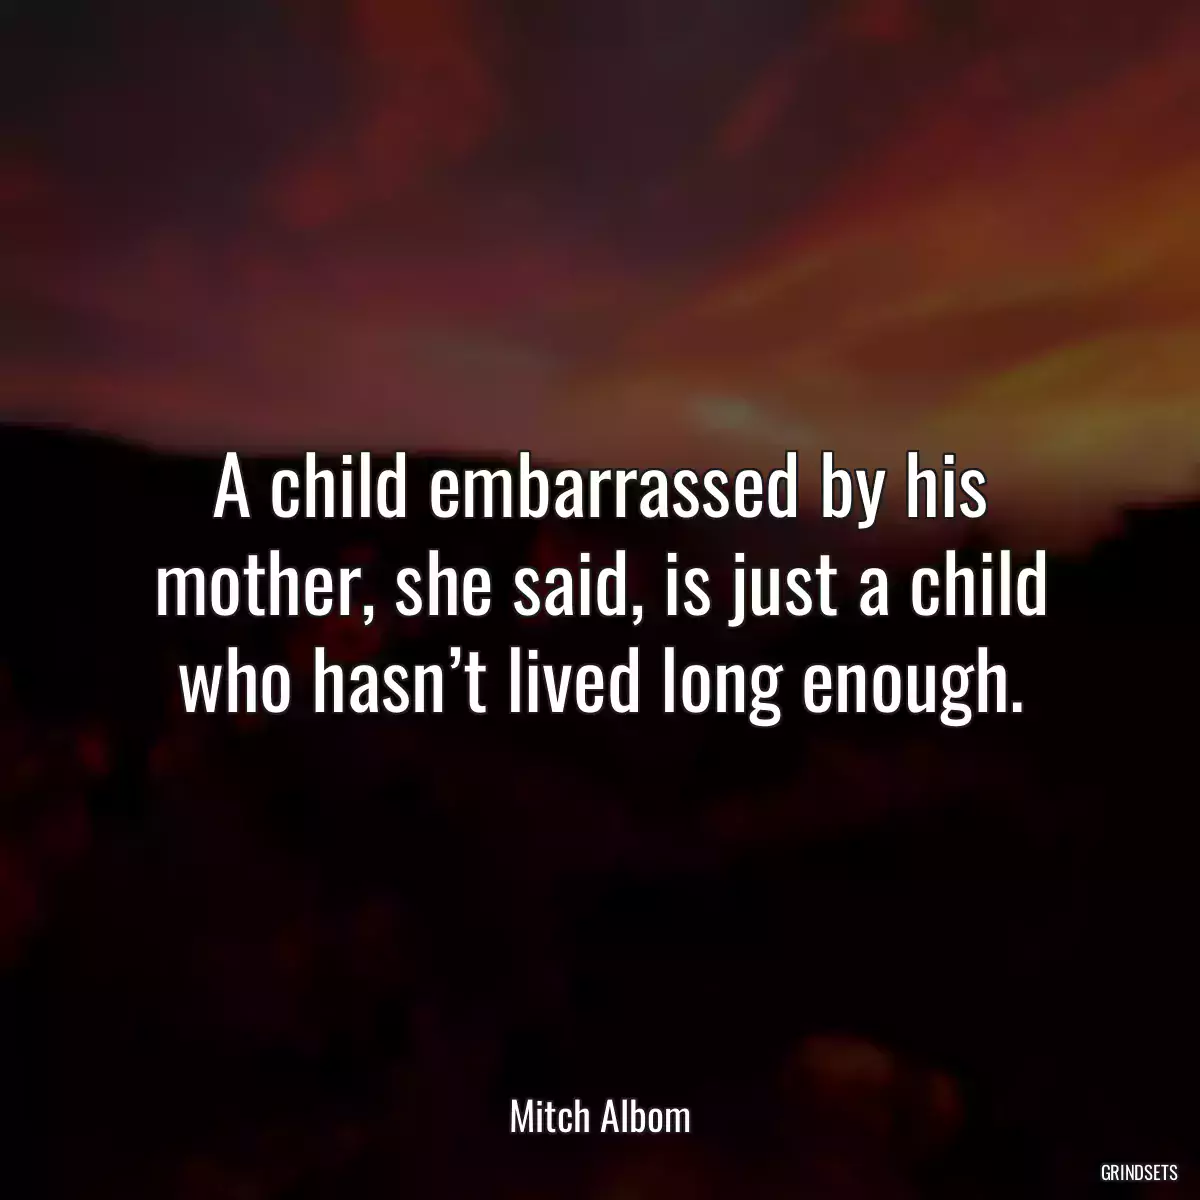 A child embarrassed by his mother, she said, is just a child who hasn’t lived long enough.